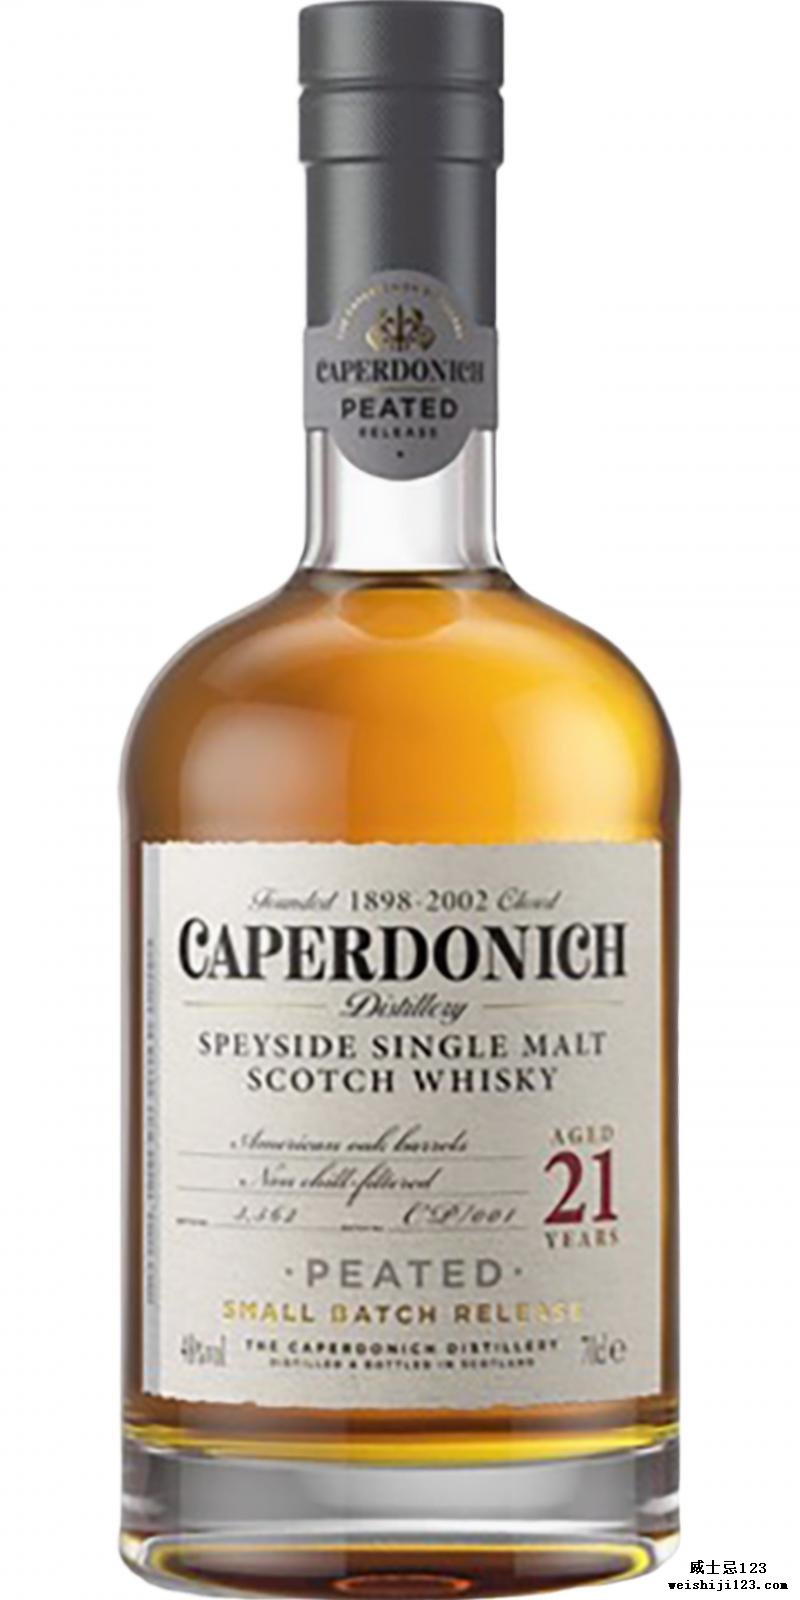 Caperdonich 21-year-old - Peated